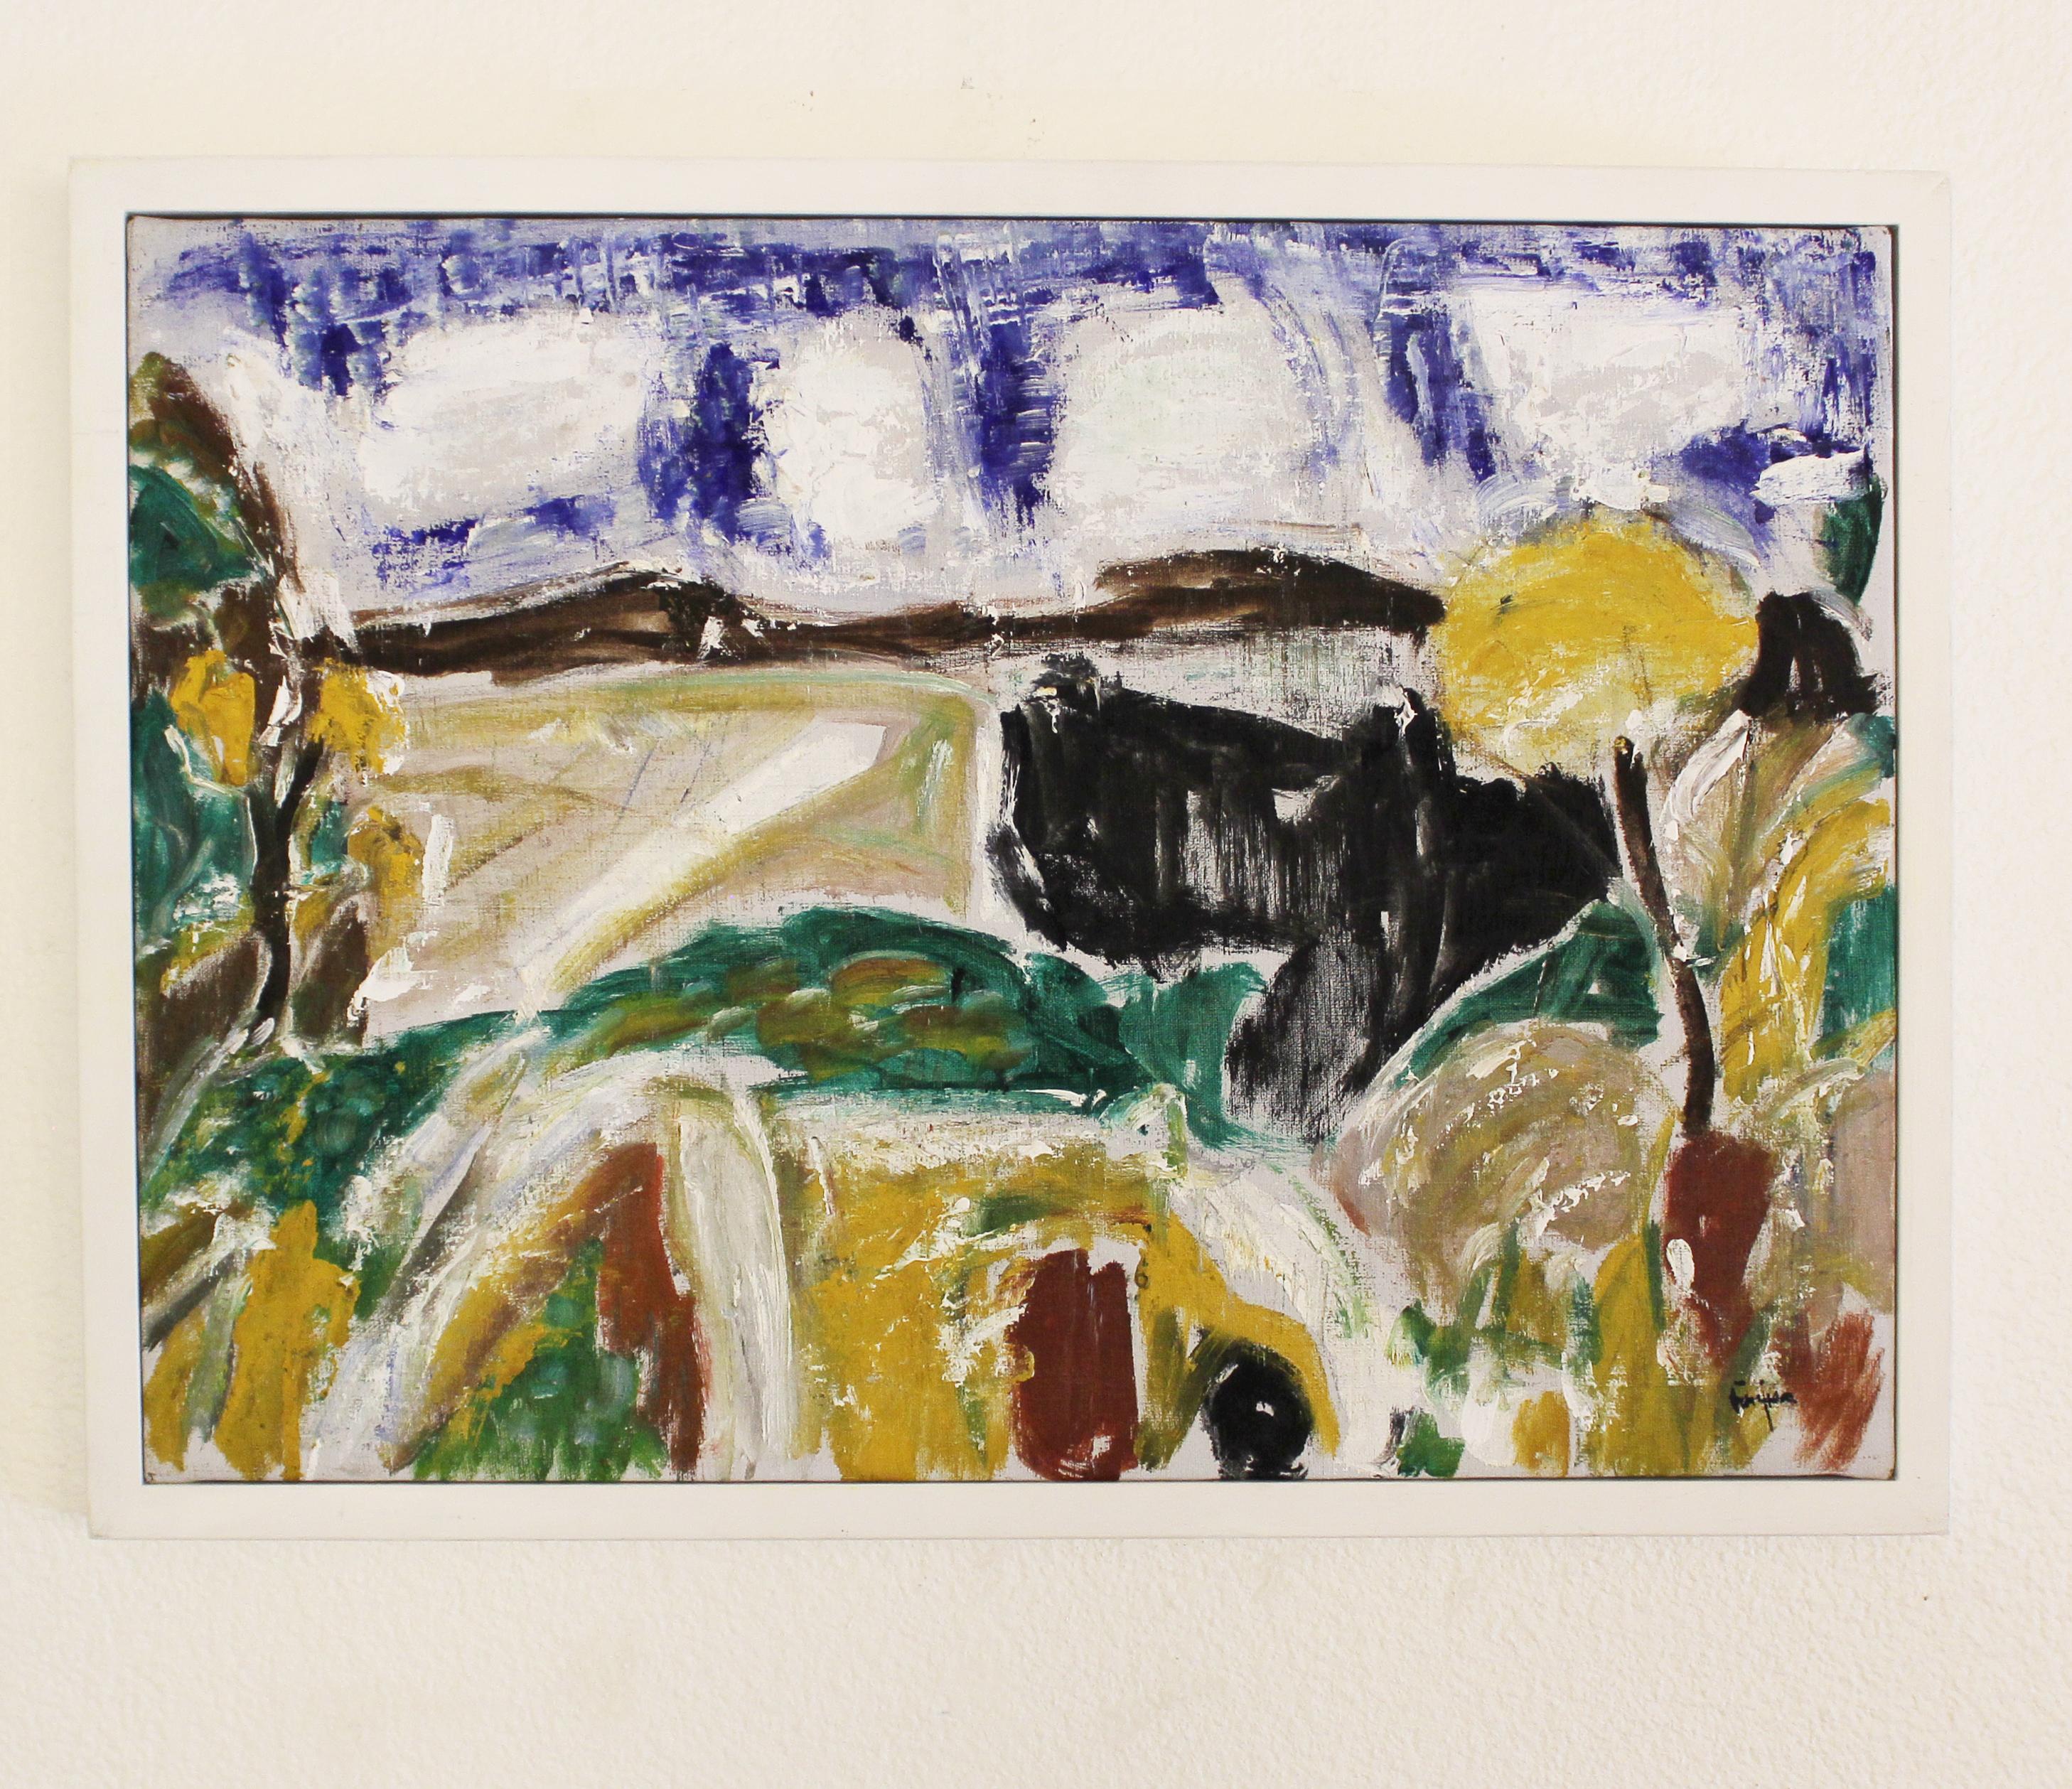 Landscape, Woodstock, New York - Abstract Expressionist Painting by Arthur Pinajian